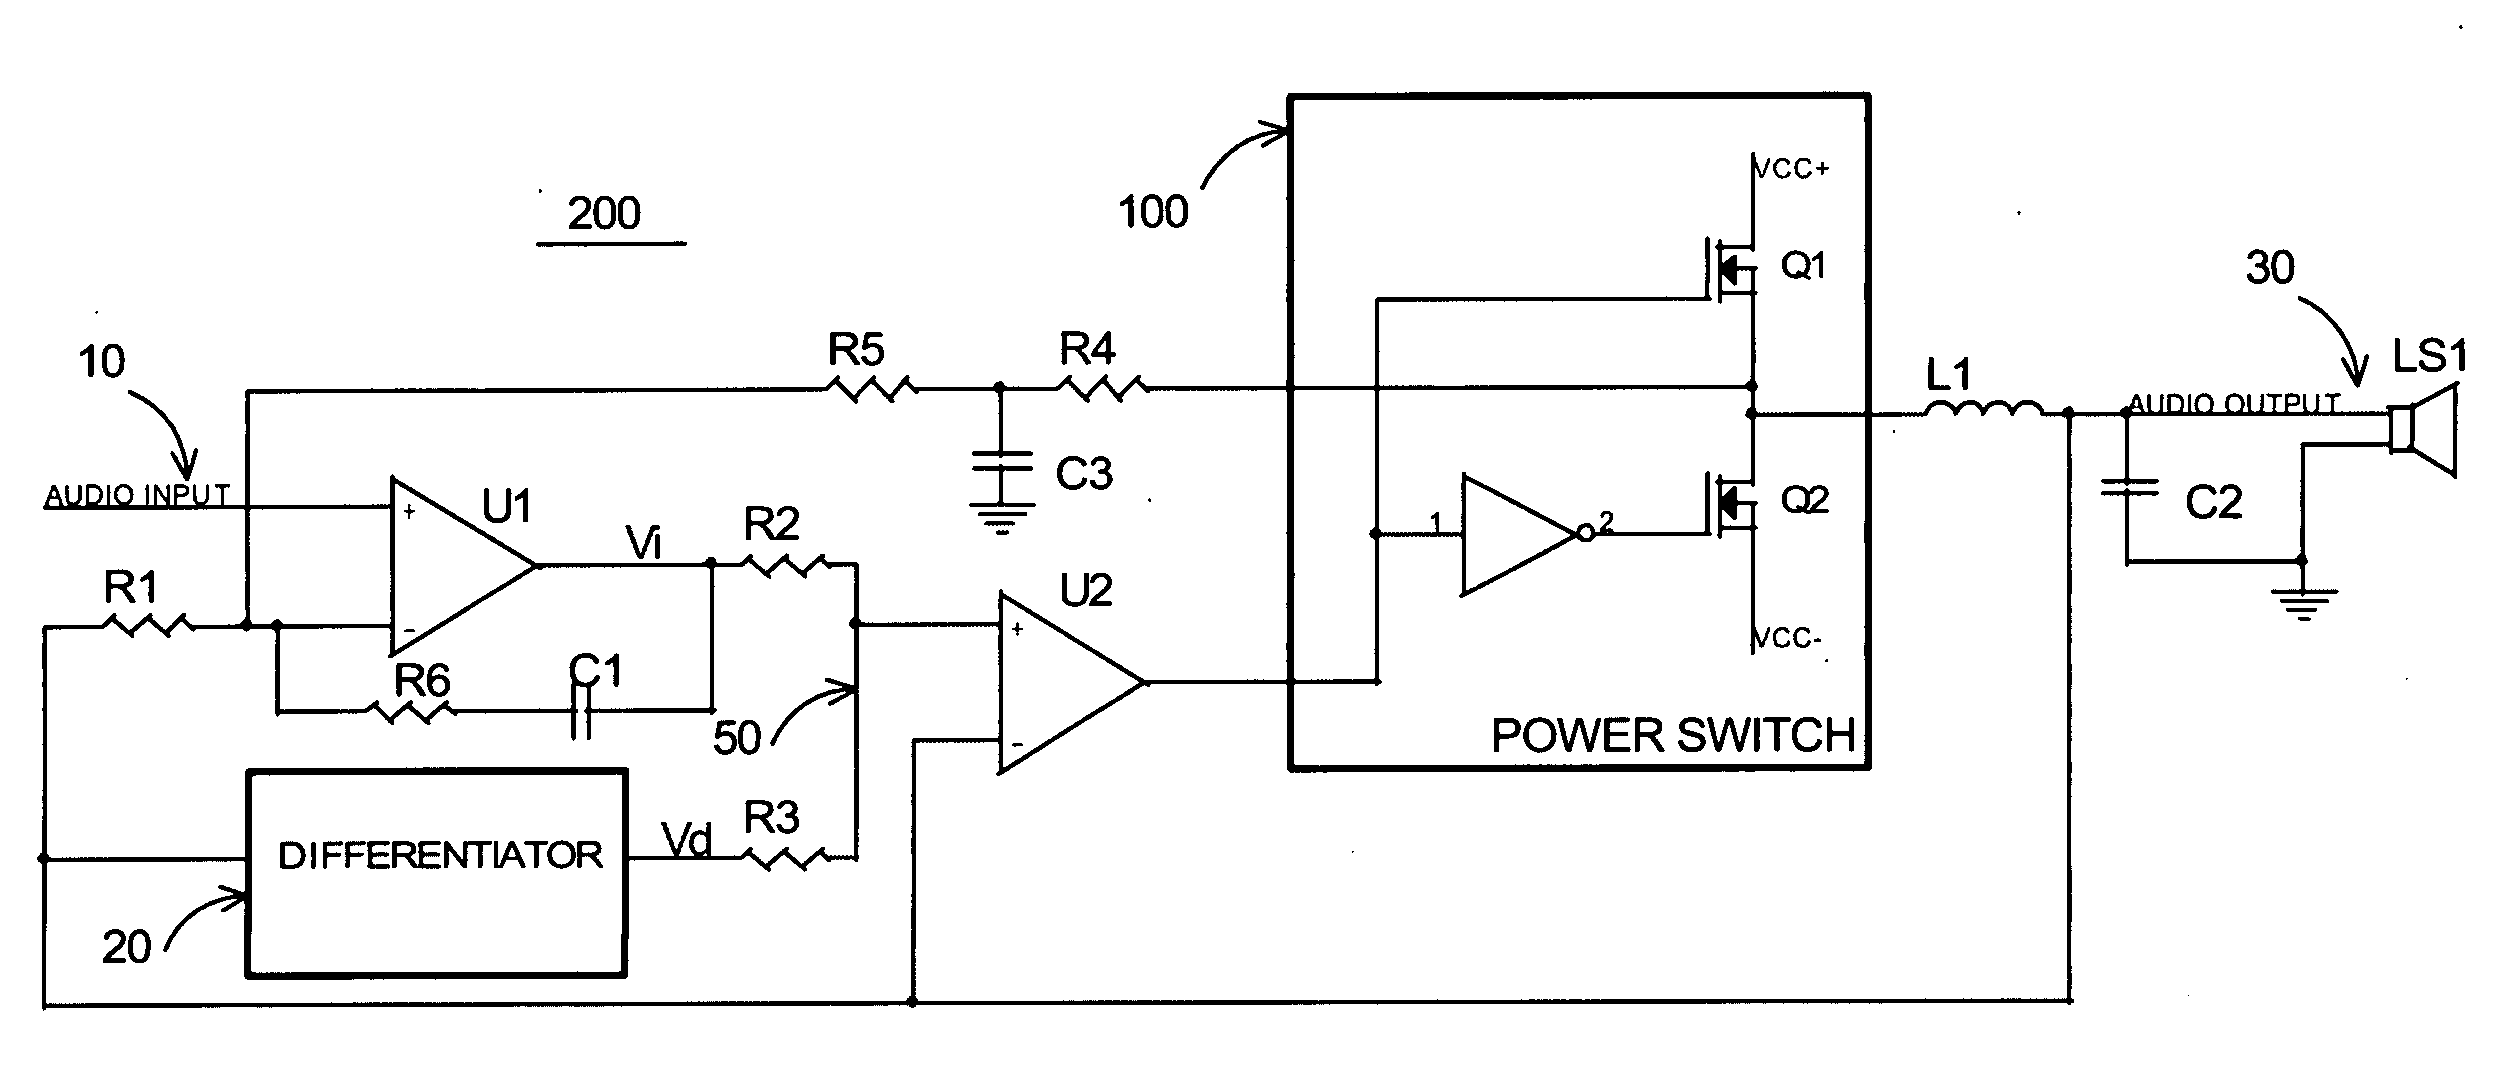 Self-oscillating switching amplifier